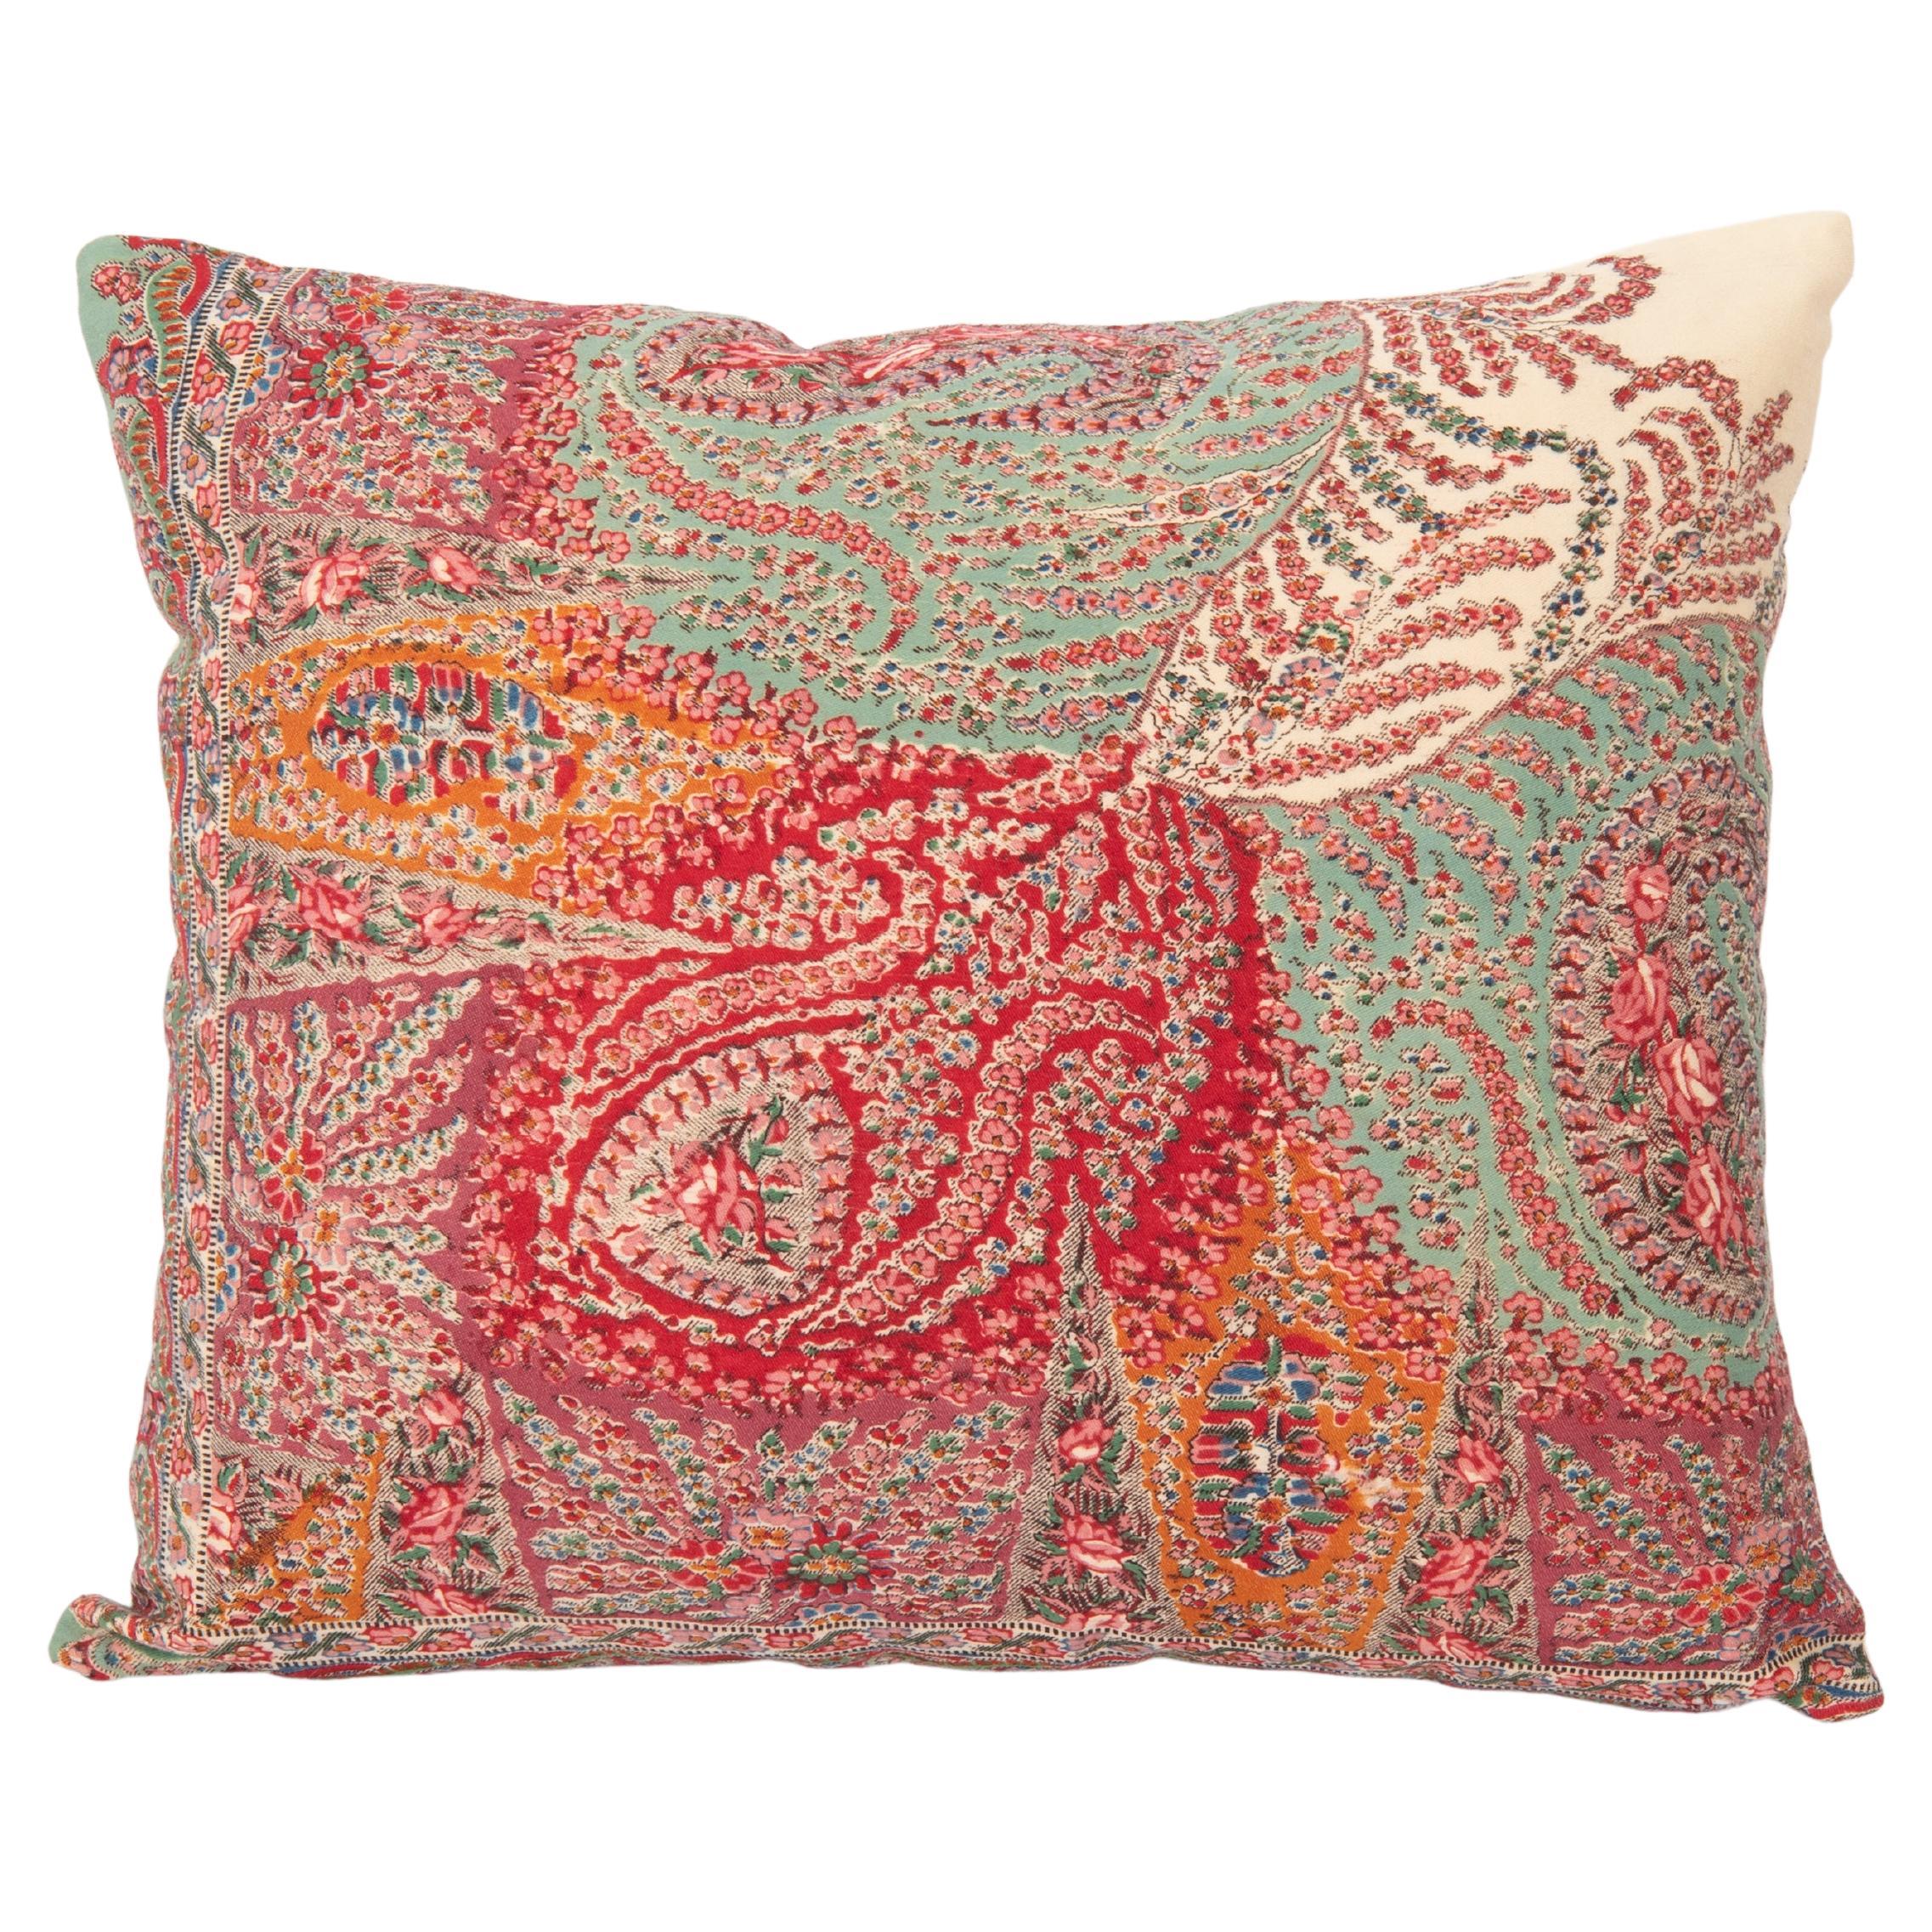  Pillow Cover Made from an English Printed Shawl, 19th C. For Sale